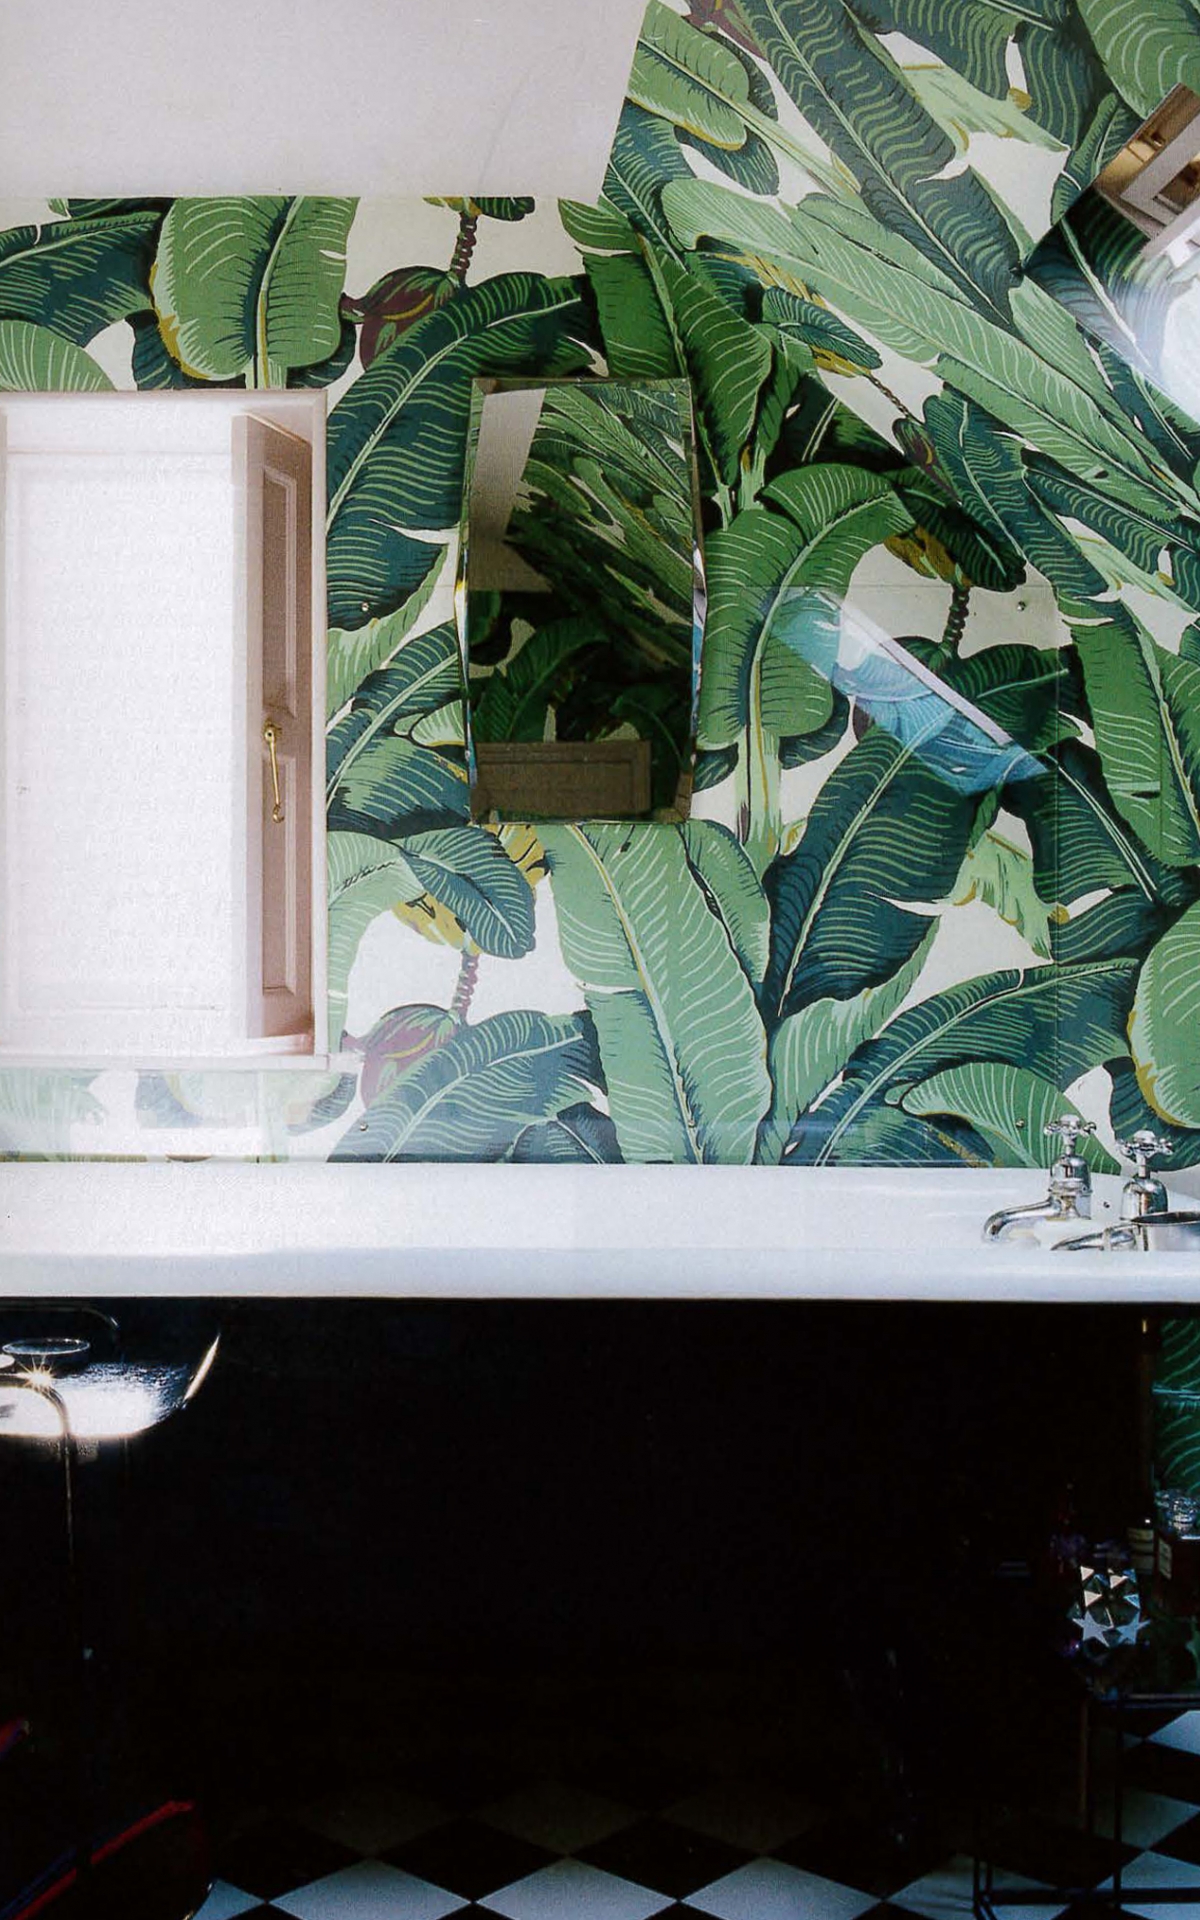 The Official Martinique Beverly Hills Hotel Wallpaper - Banana Leaf Wallpaper Bathroom , HD Wallpaper & Backgrounds